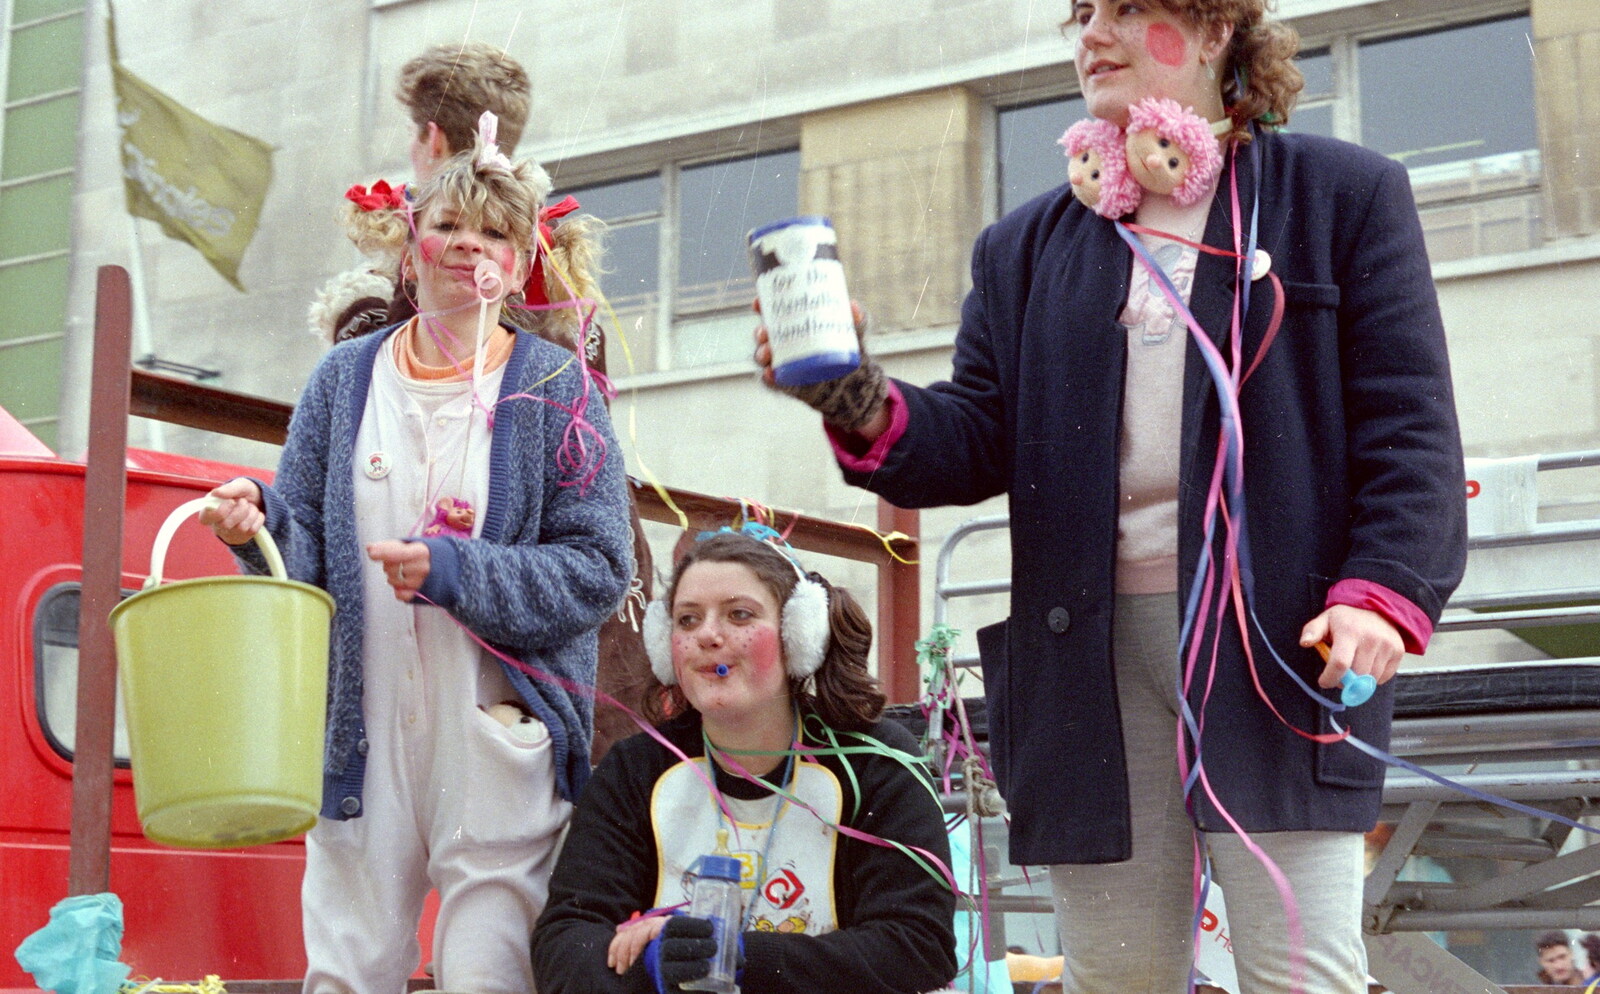 Some 'babies' do collecting from Uni: PPSU "Jazz" RAG Street Parade, Plymouth, Devon - 17th February 1986